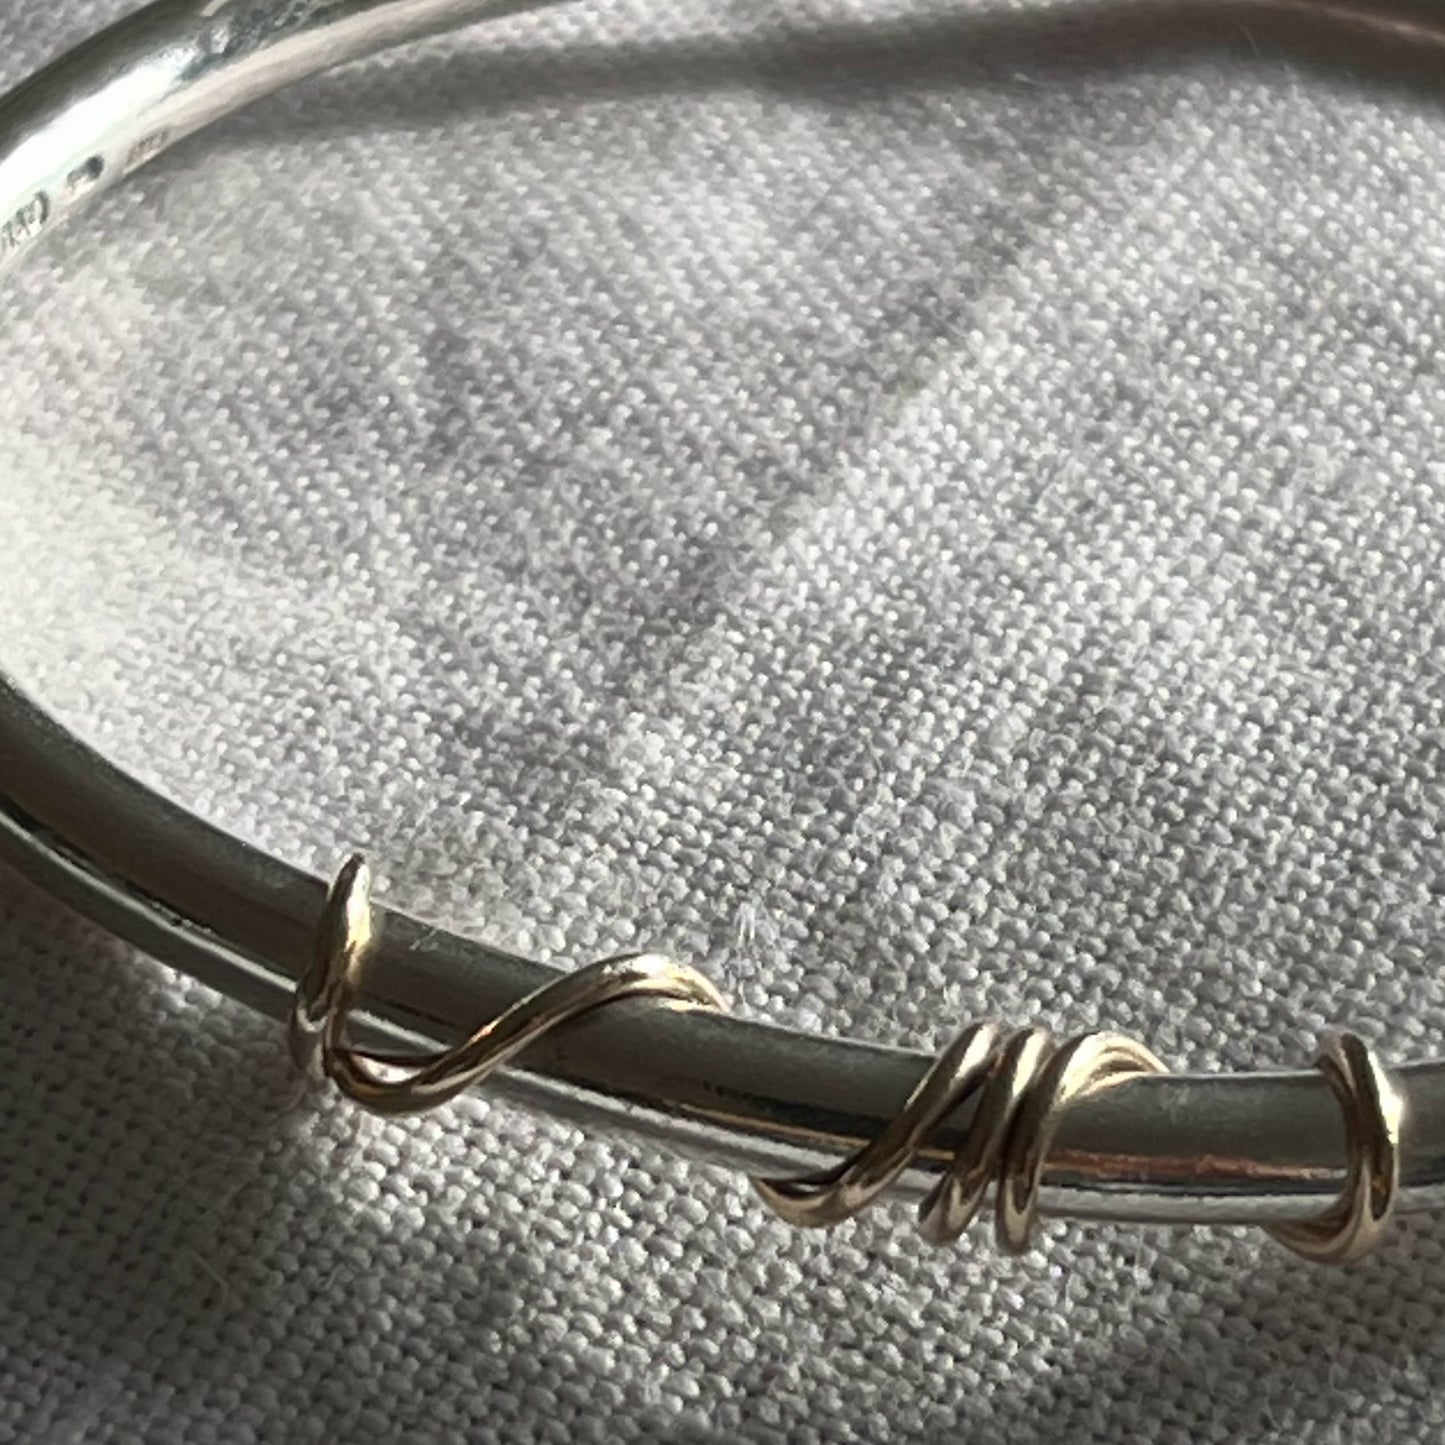 close up of handmade sterling silver solid bangle with 9ct gold wrap of wire twisted around the front of the bangle